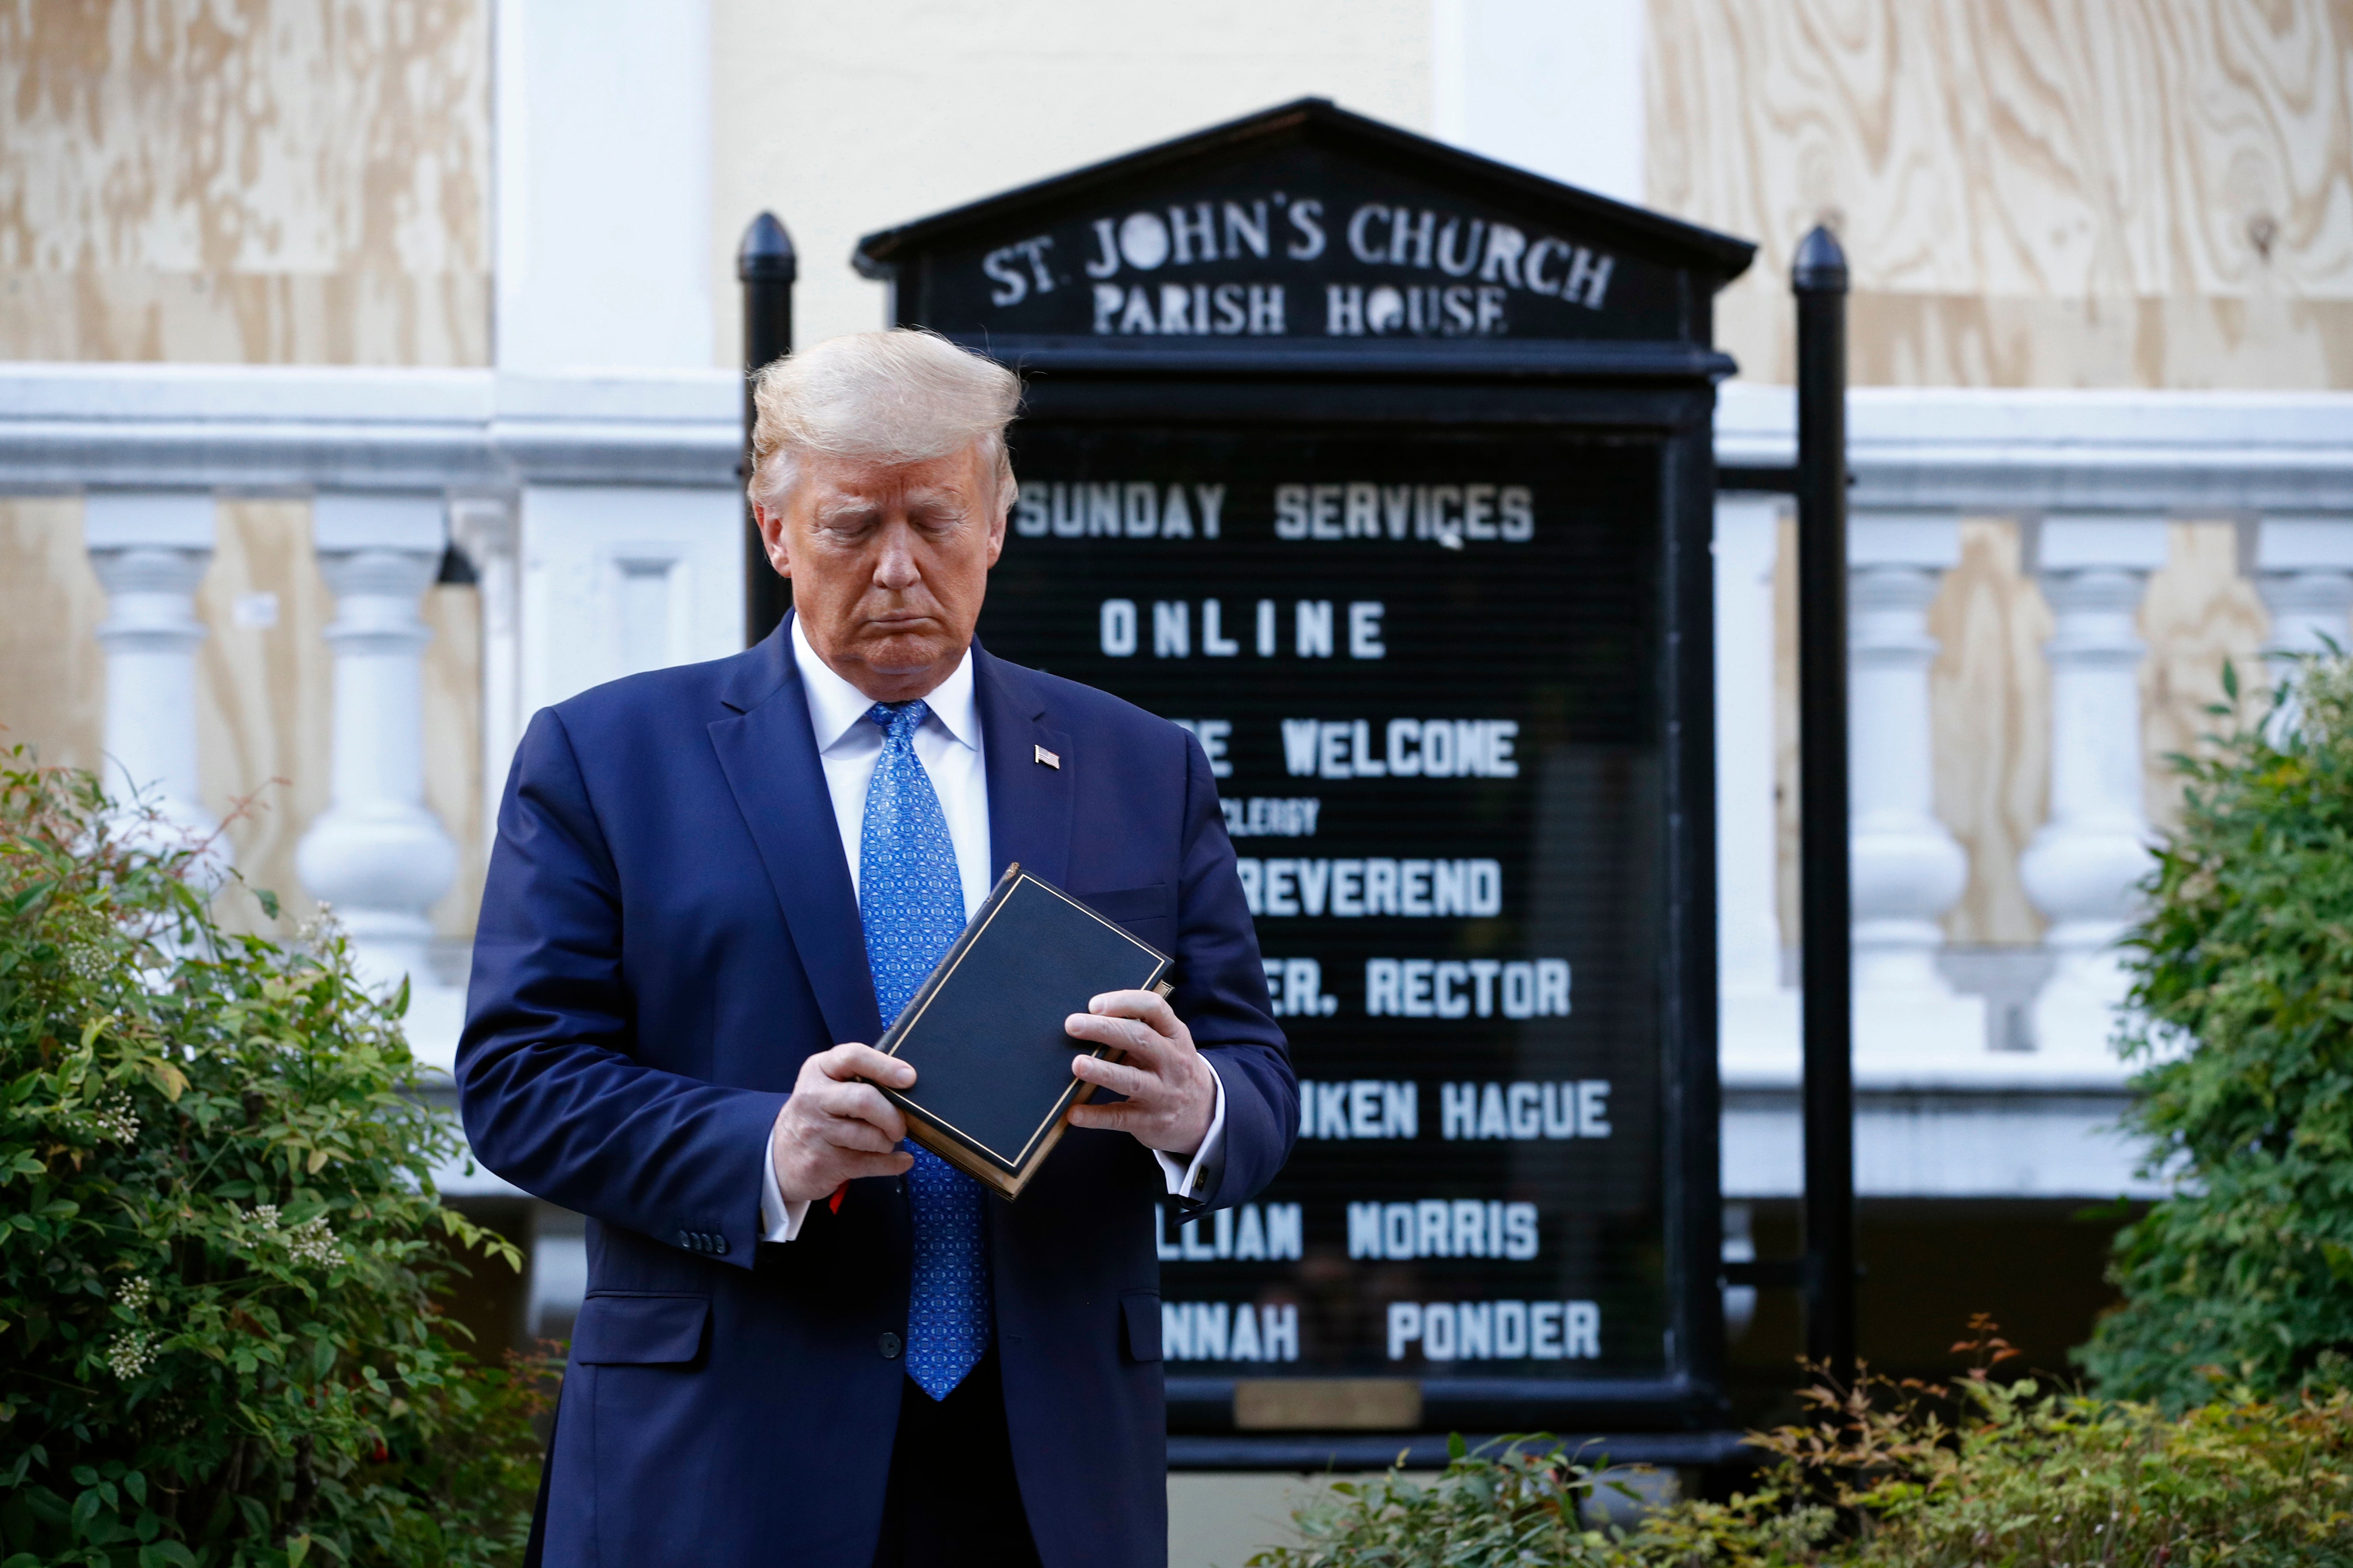 Trump was pictured with a Bible outside St John’s Parish House in 2020 in what many observers condemned as a stunt